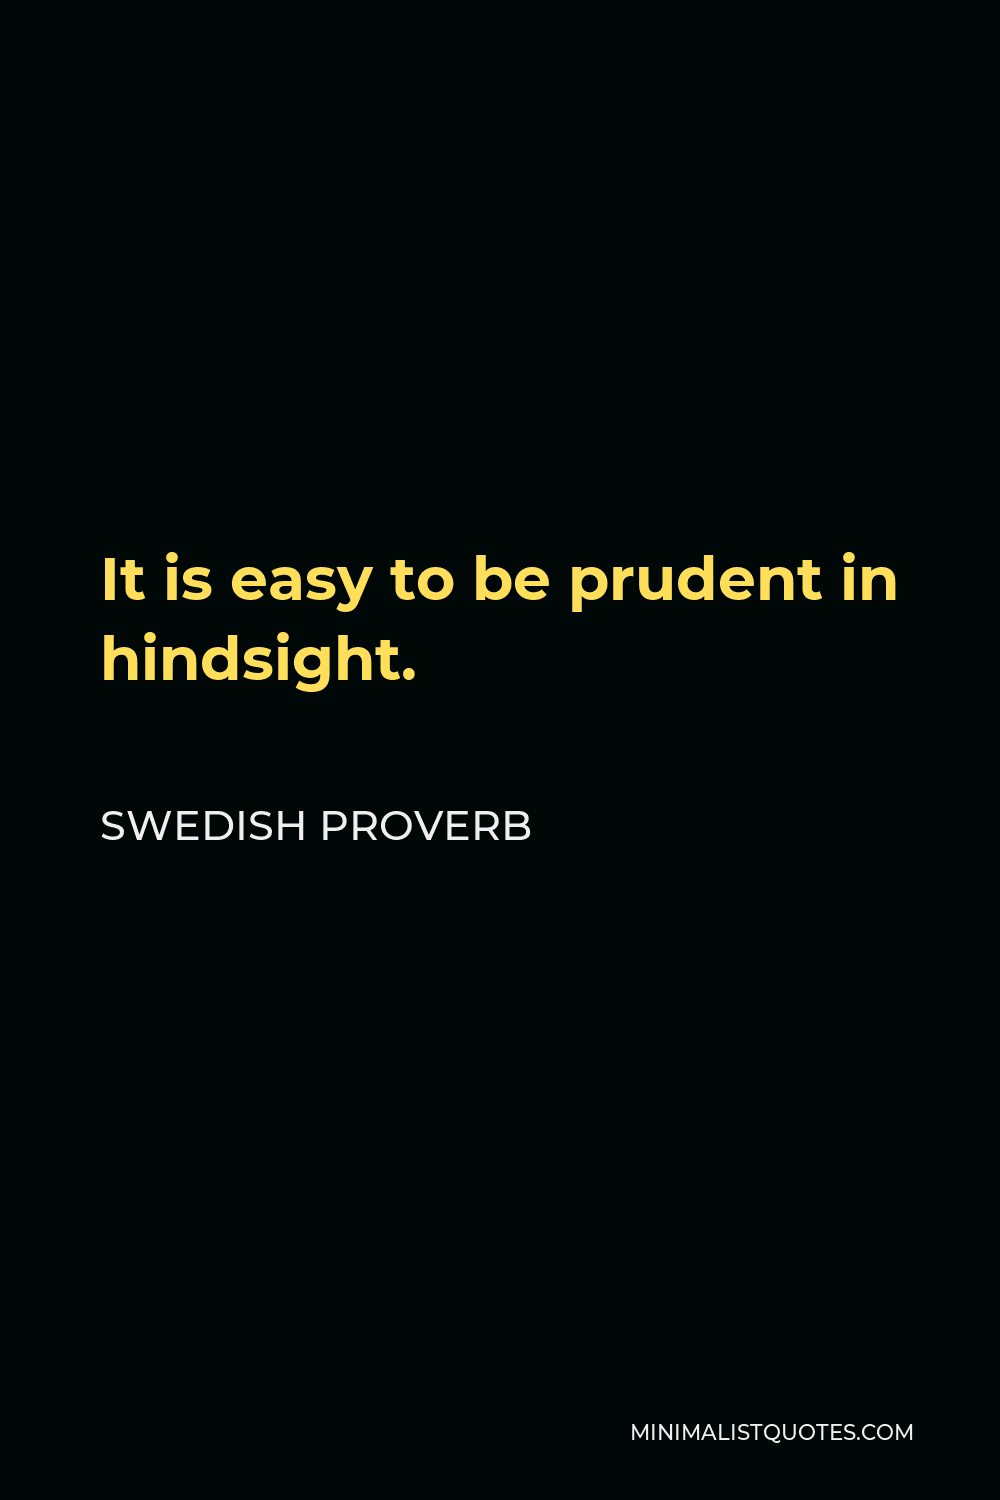 Swedish Proverb Quote - It is easy to be prudent in hindsight.